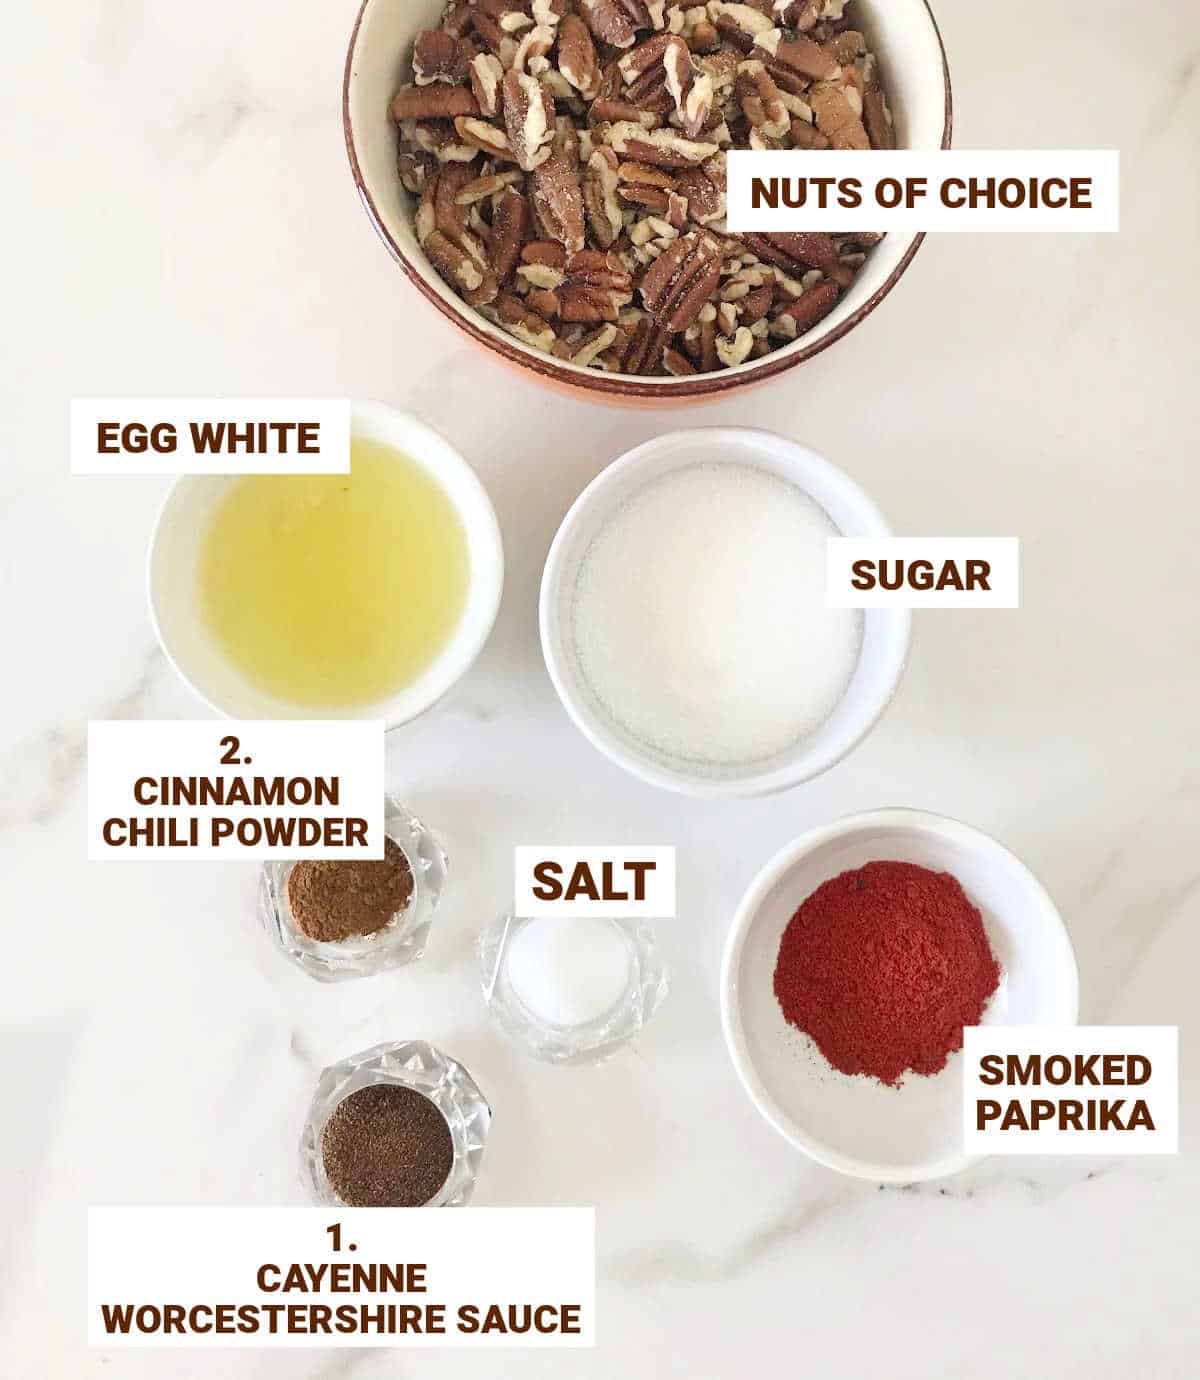 Cocktail nuts ingredients in bowls on white surface including ground spices, egg white, sugar, and salt.